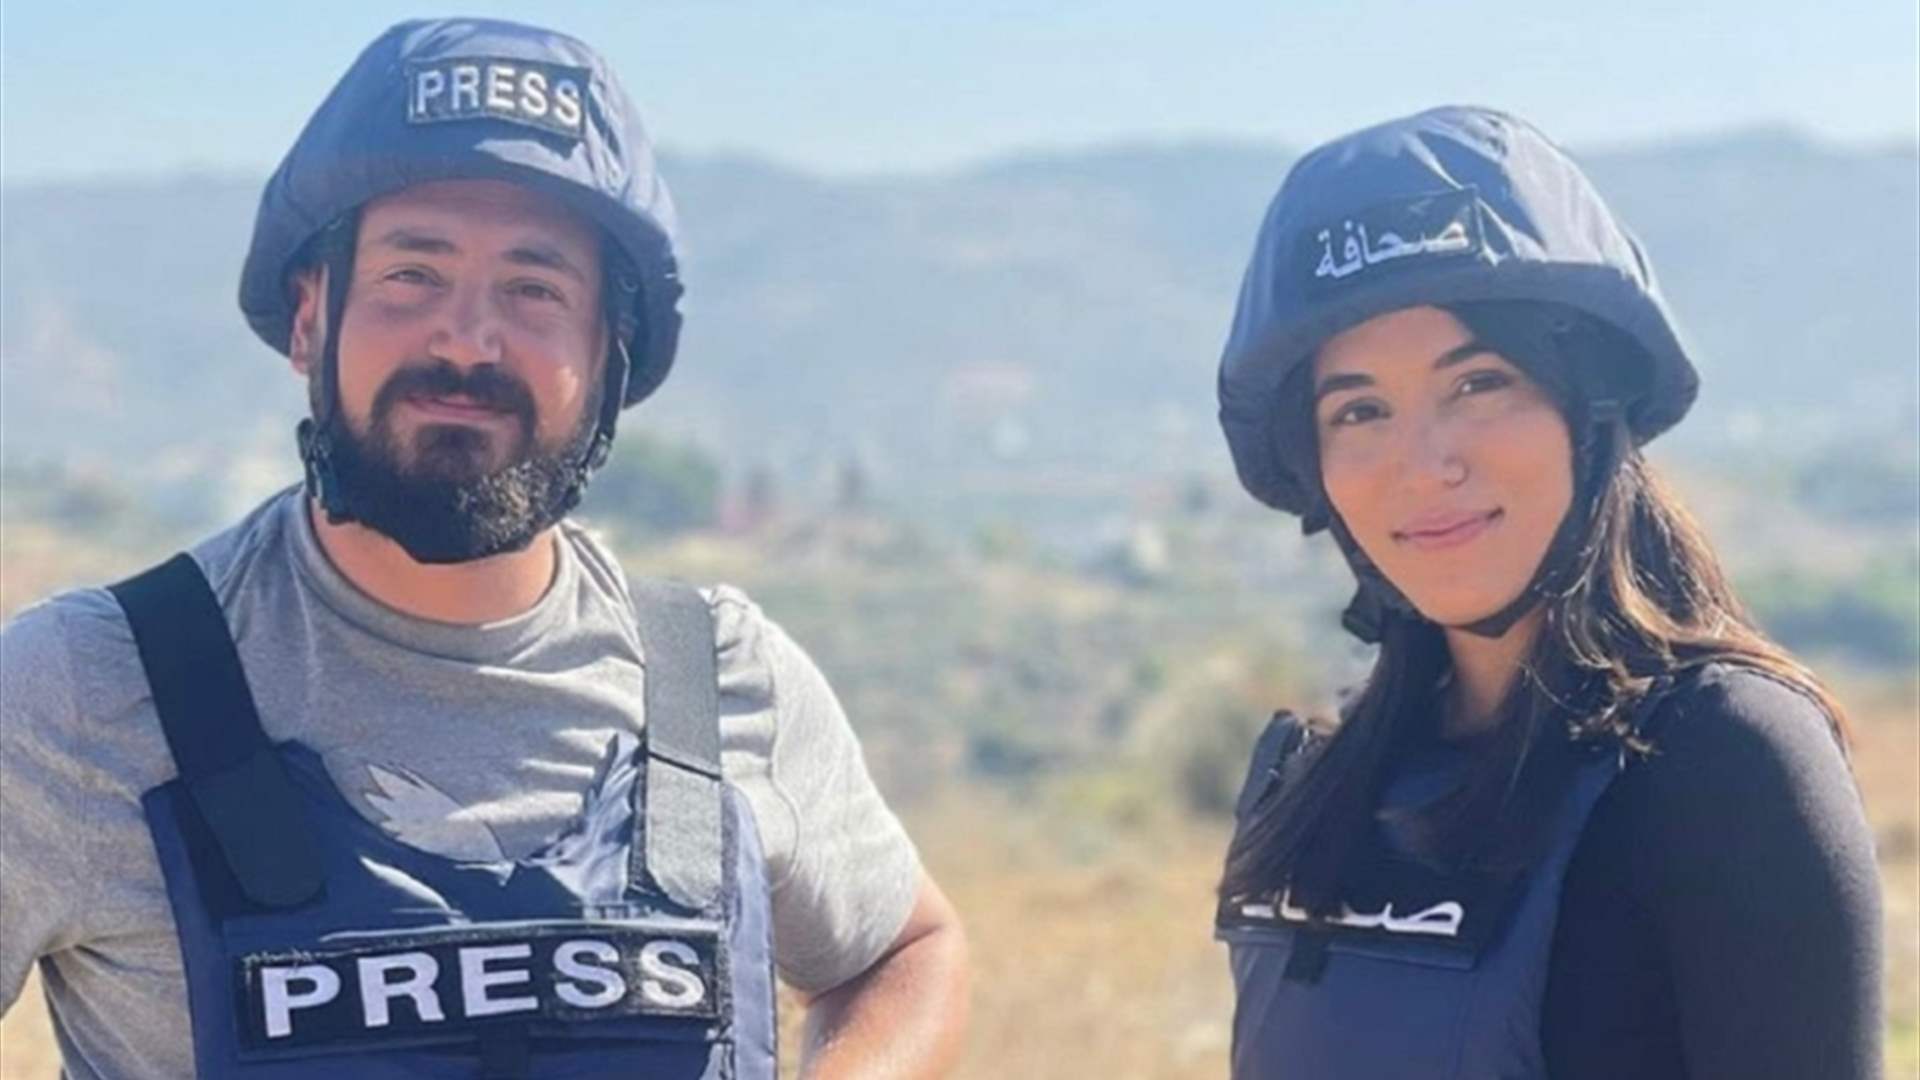 Lebanese journalist toll rises: Israel&#39;s systematic attacks on media personnel